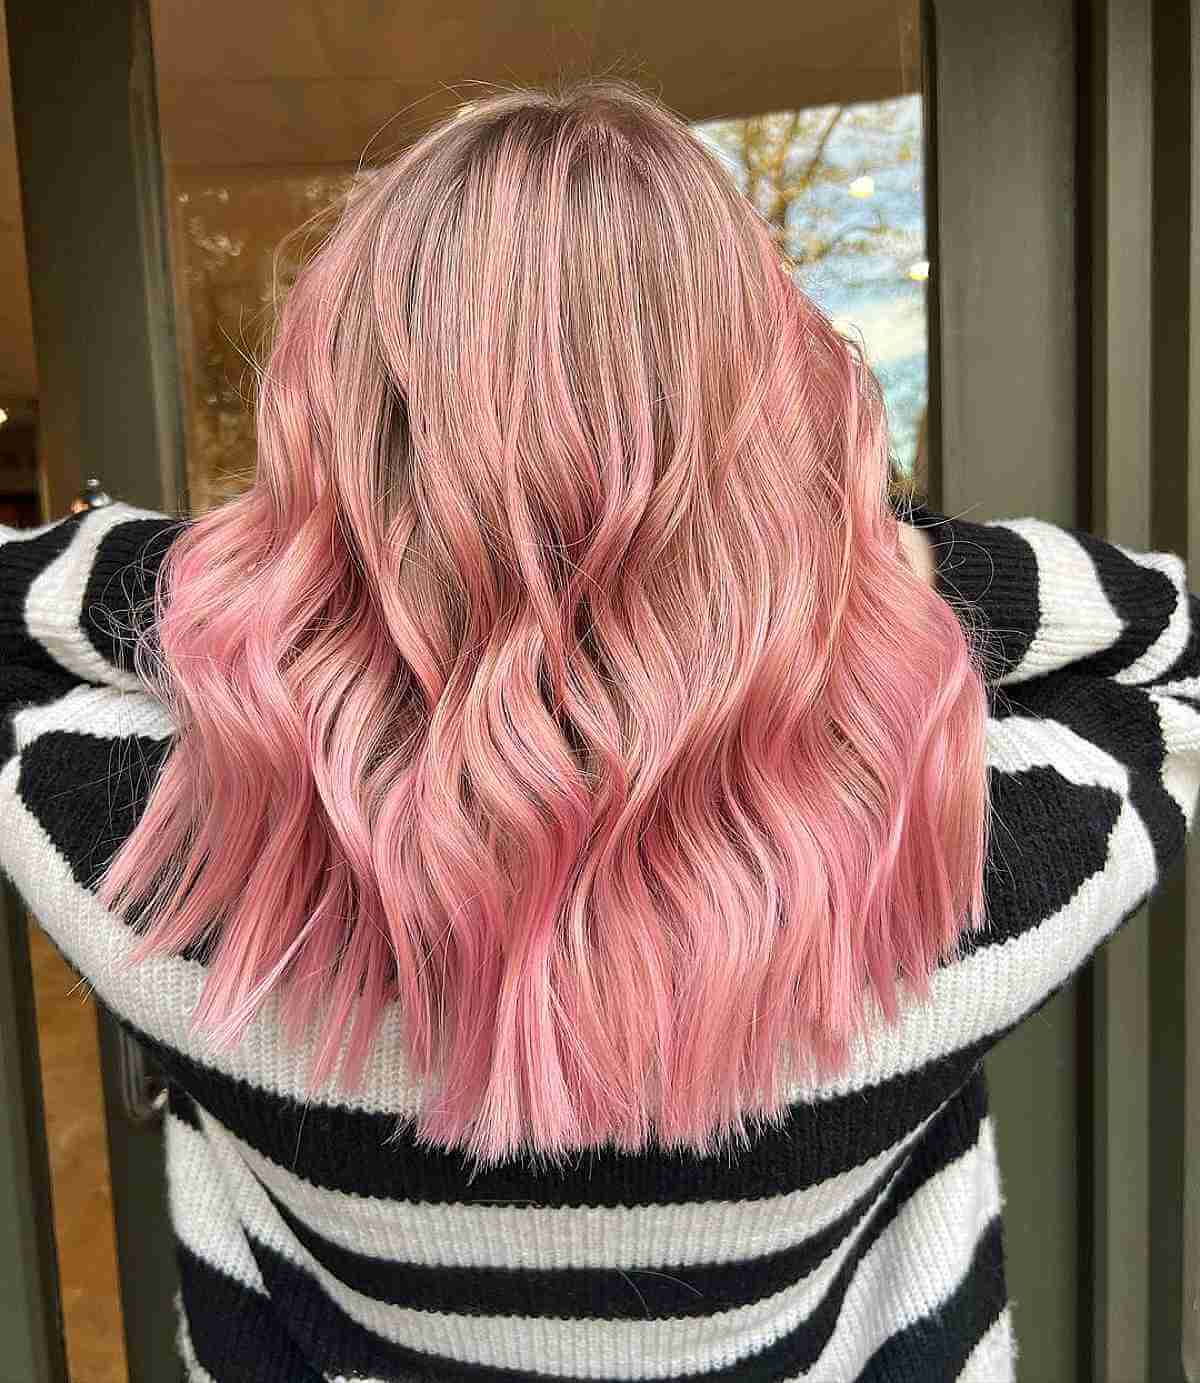 Light Brown Hair with A Peachy Pink Shade